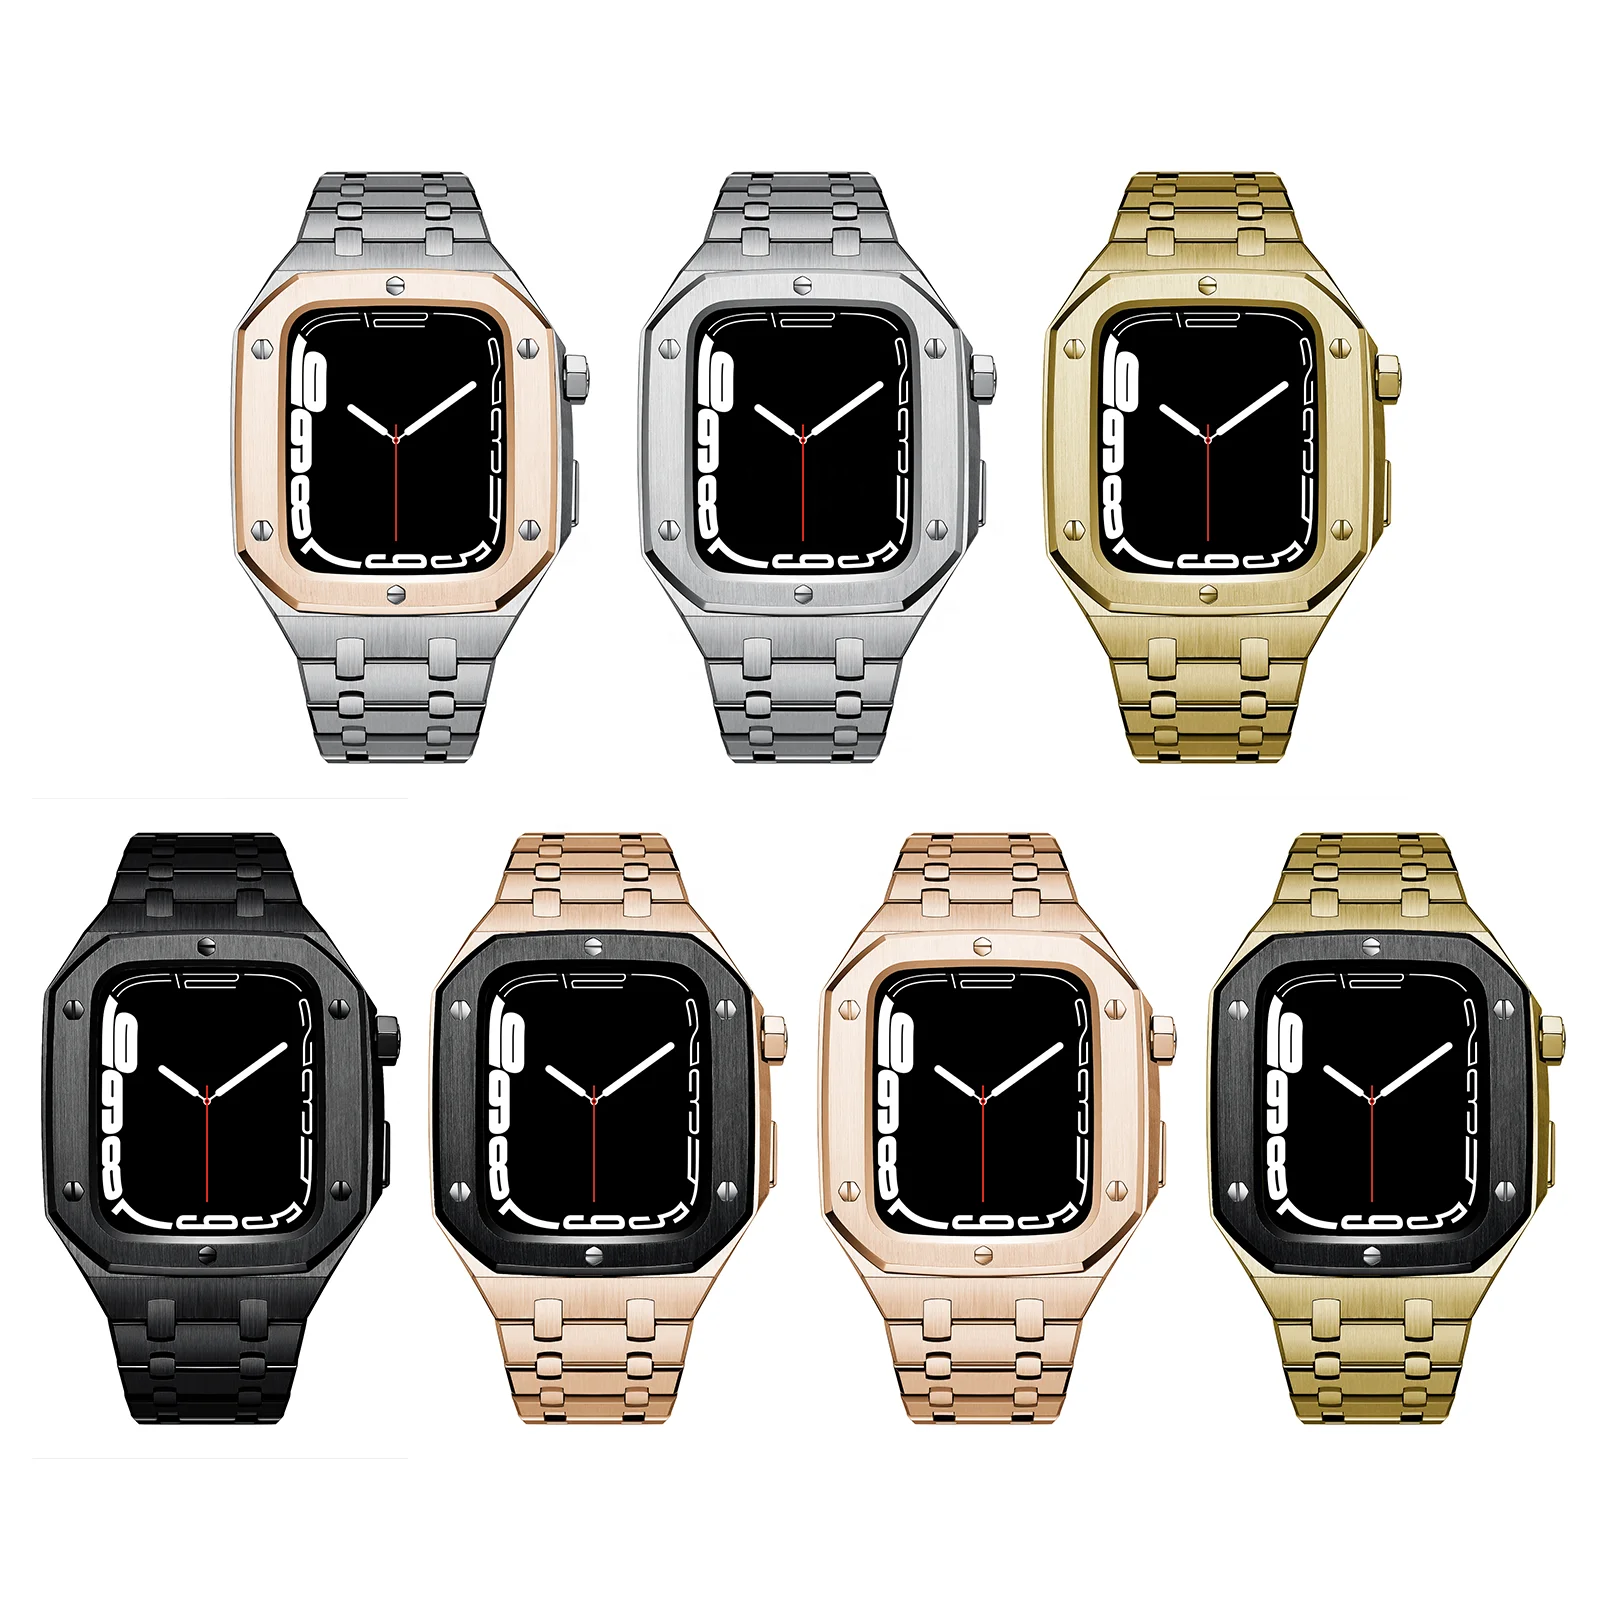 

Trendy Stock No Smart 316L Stainless Steel Watch Case For Apple Watch Series 7 6 For 40MM 44MM 41MM 45MM Apple Watch Case, Multi colors